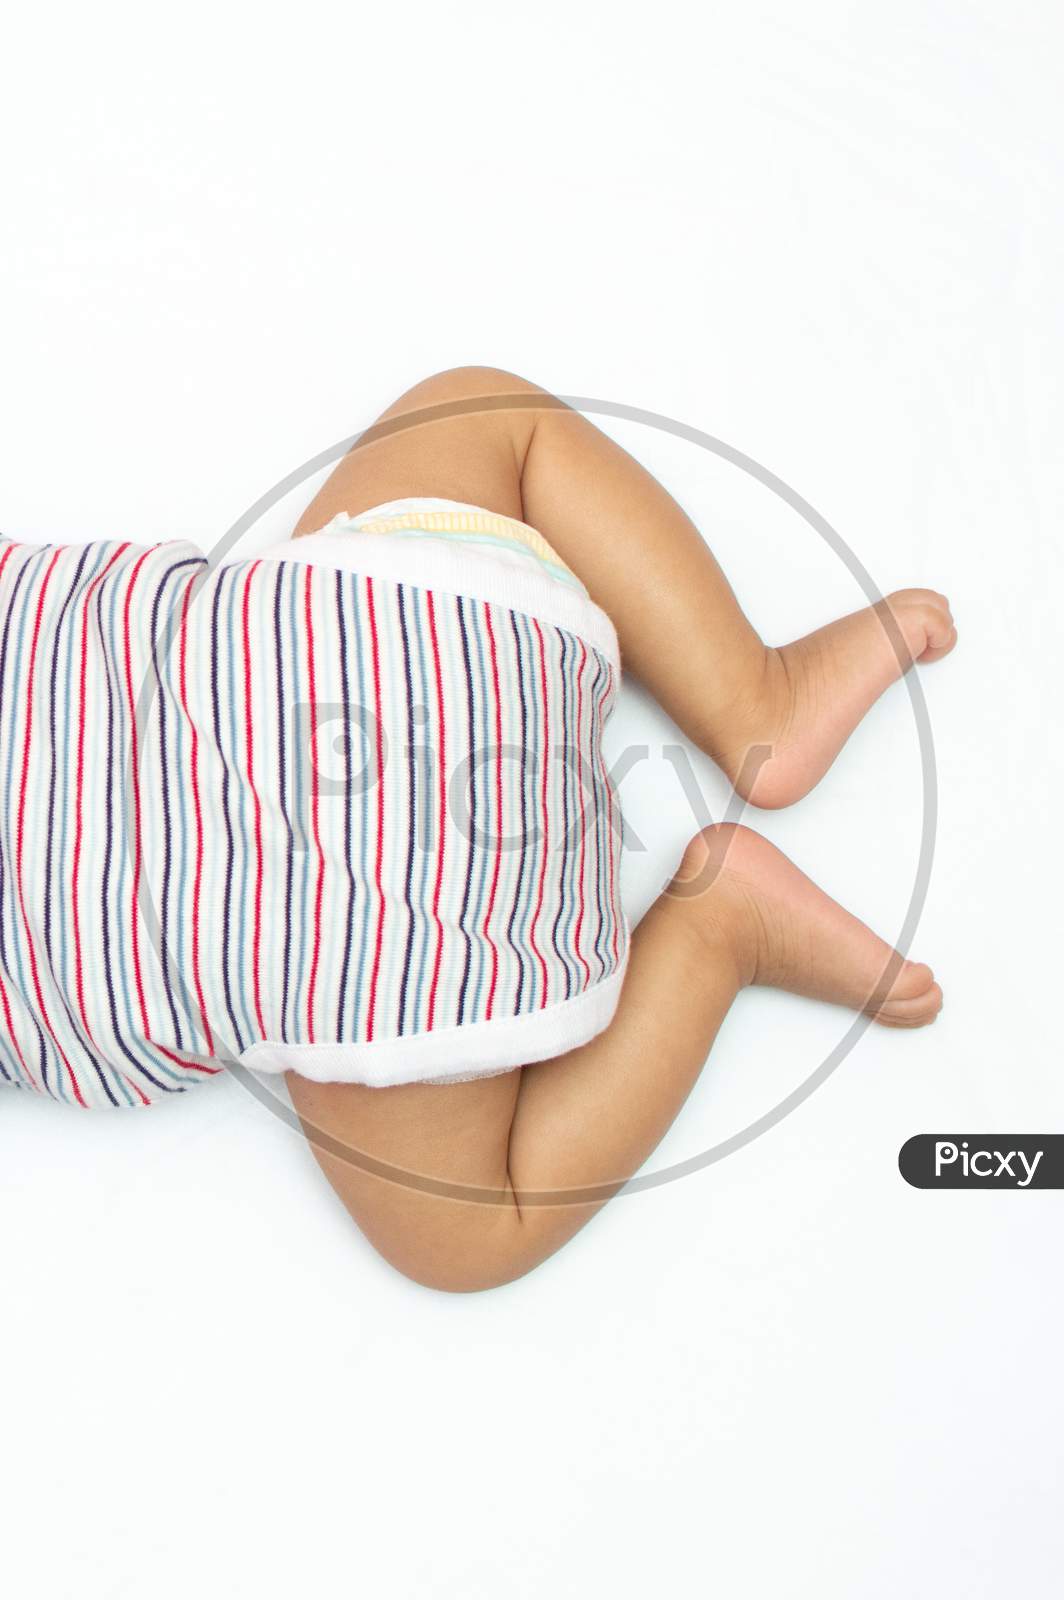 Infant Legs Over Head Photo Lying On His Chest